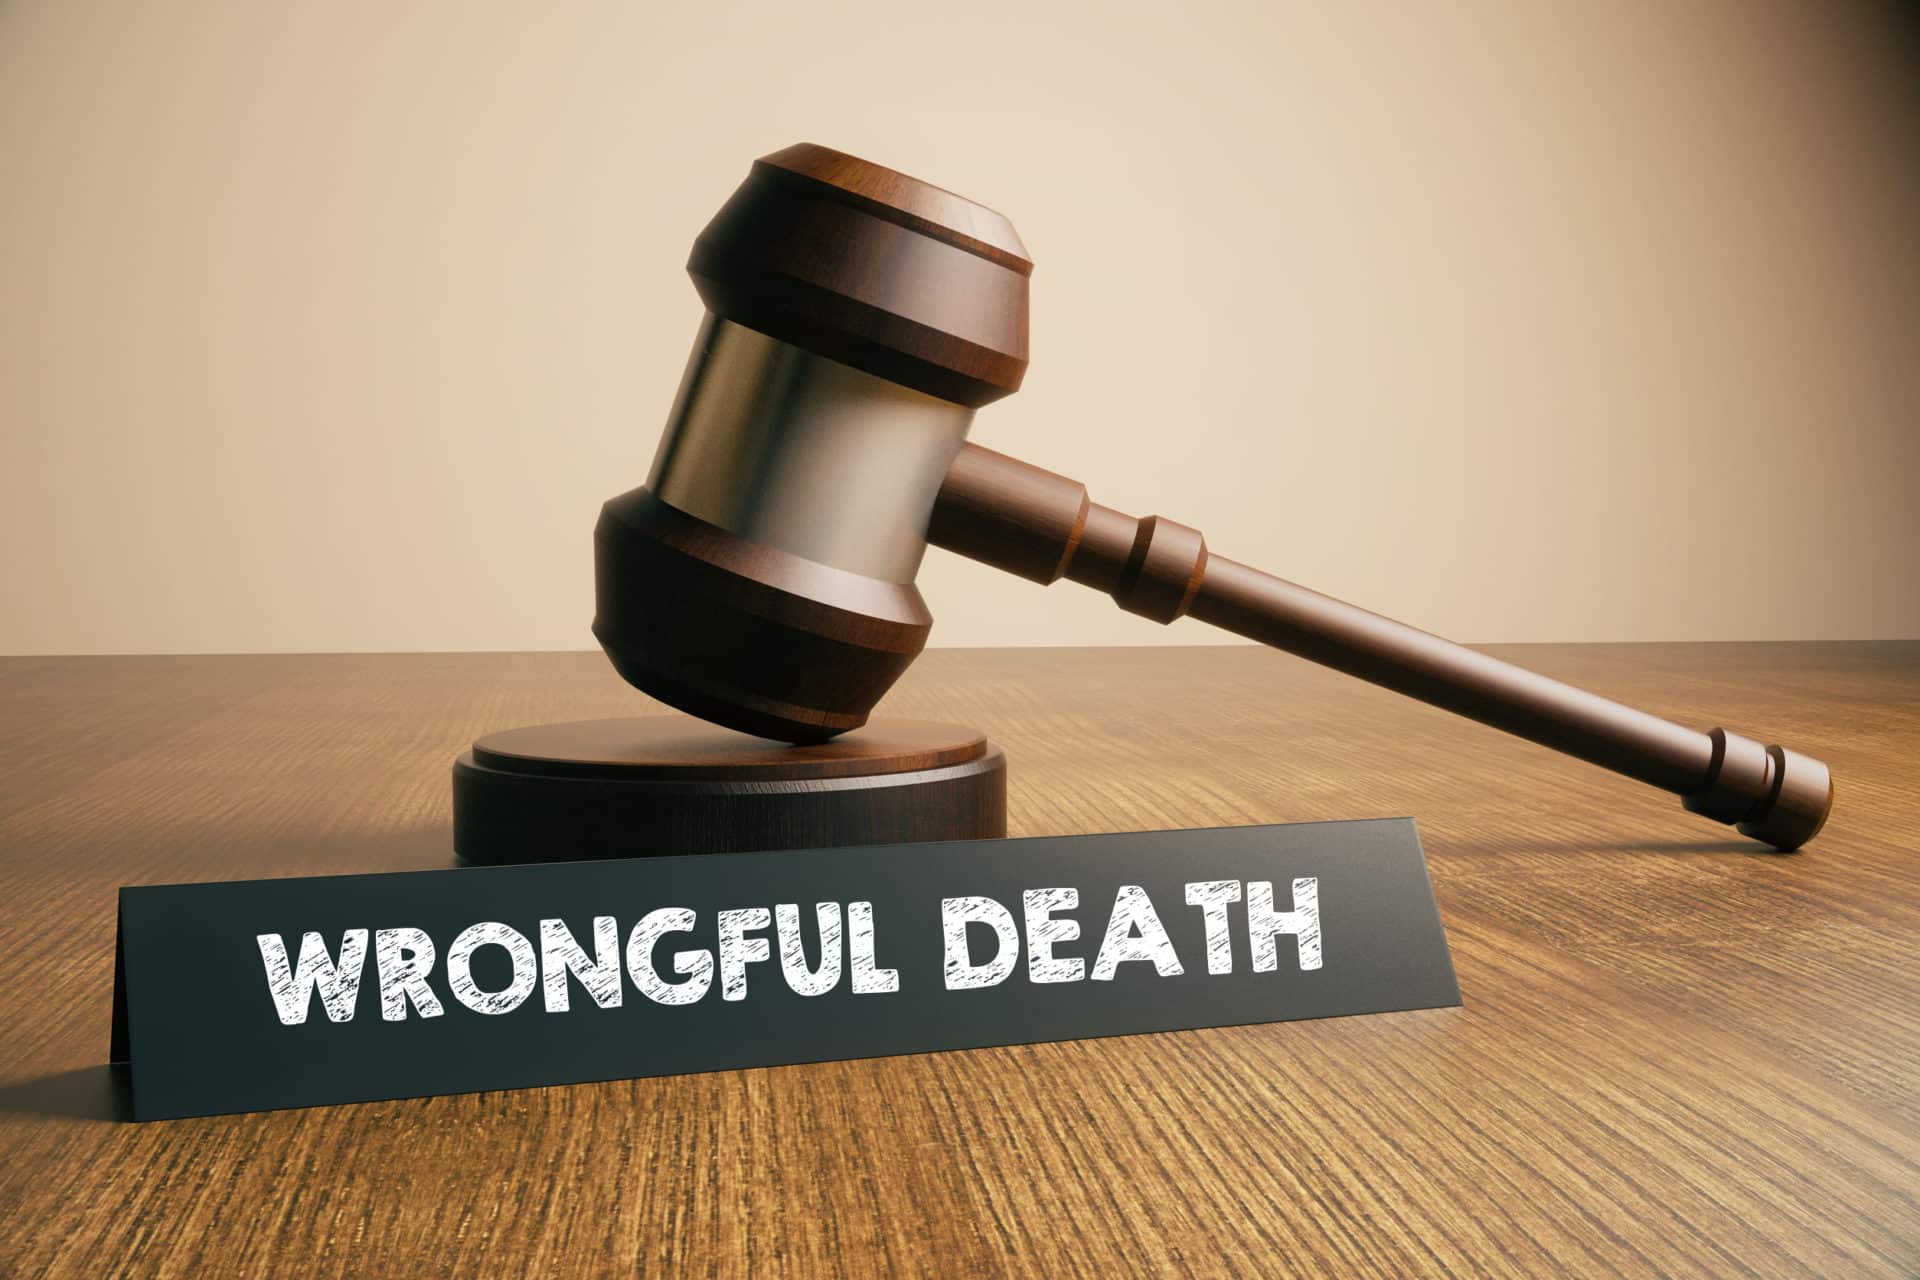 NY's Wrongful Death Statute Almost Changed - Do You Know Why?